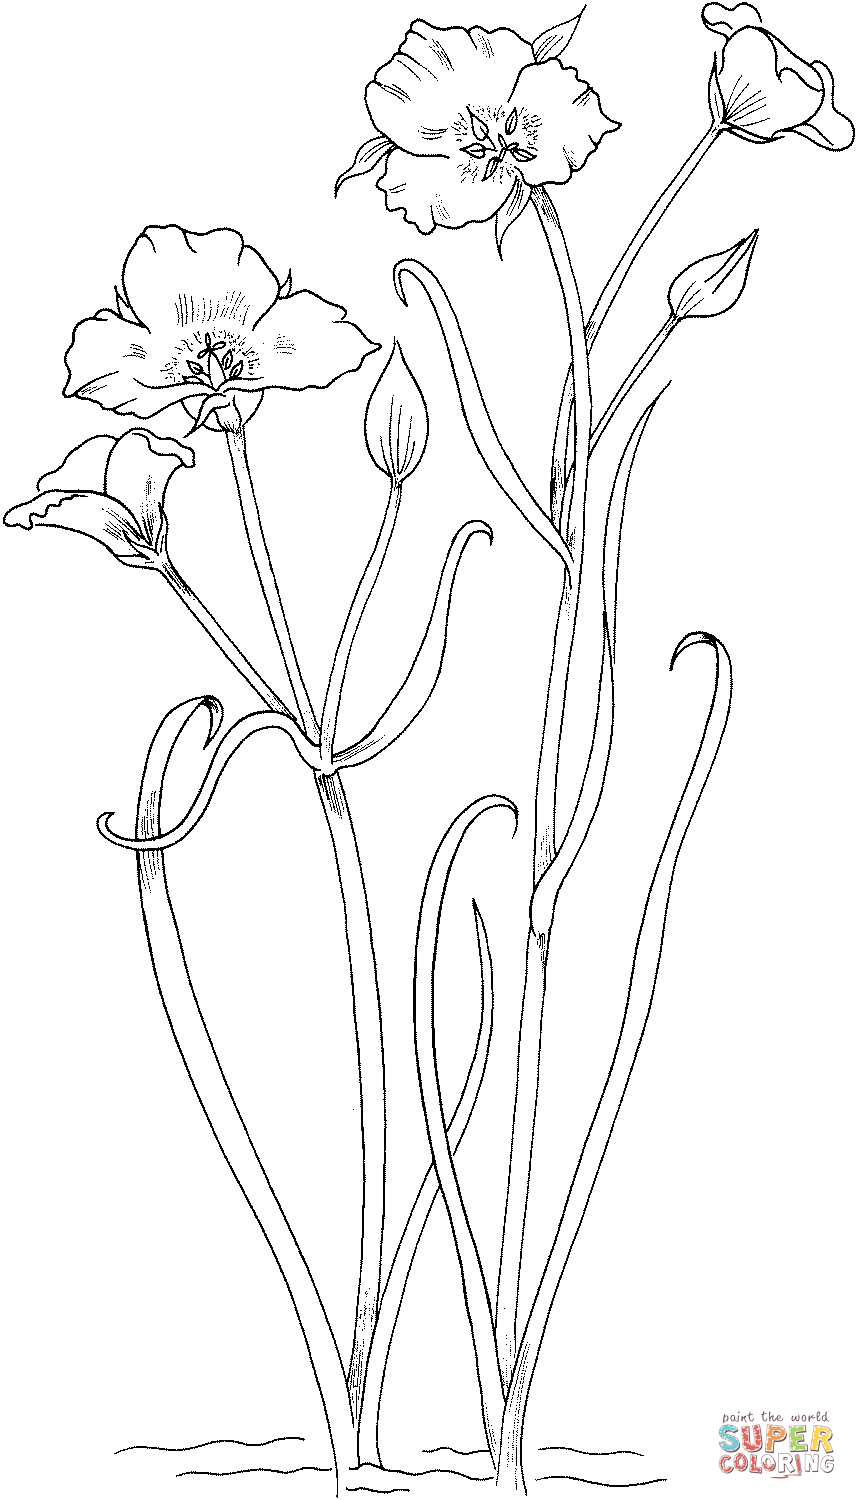 Calochortus Nuttallii Or Sego Lily Coloring Pages